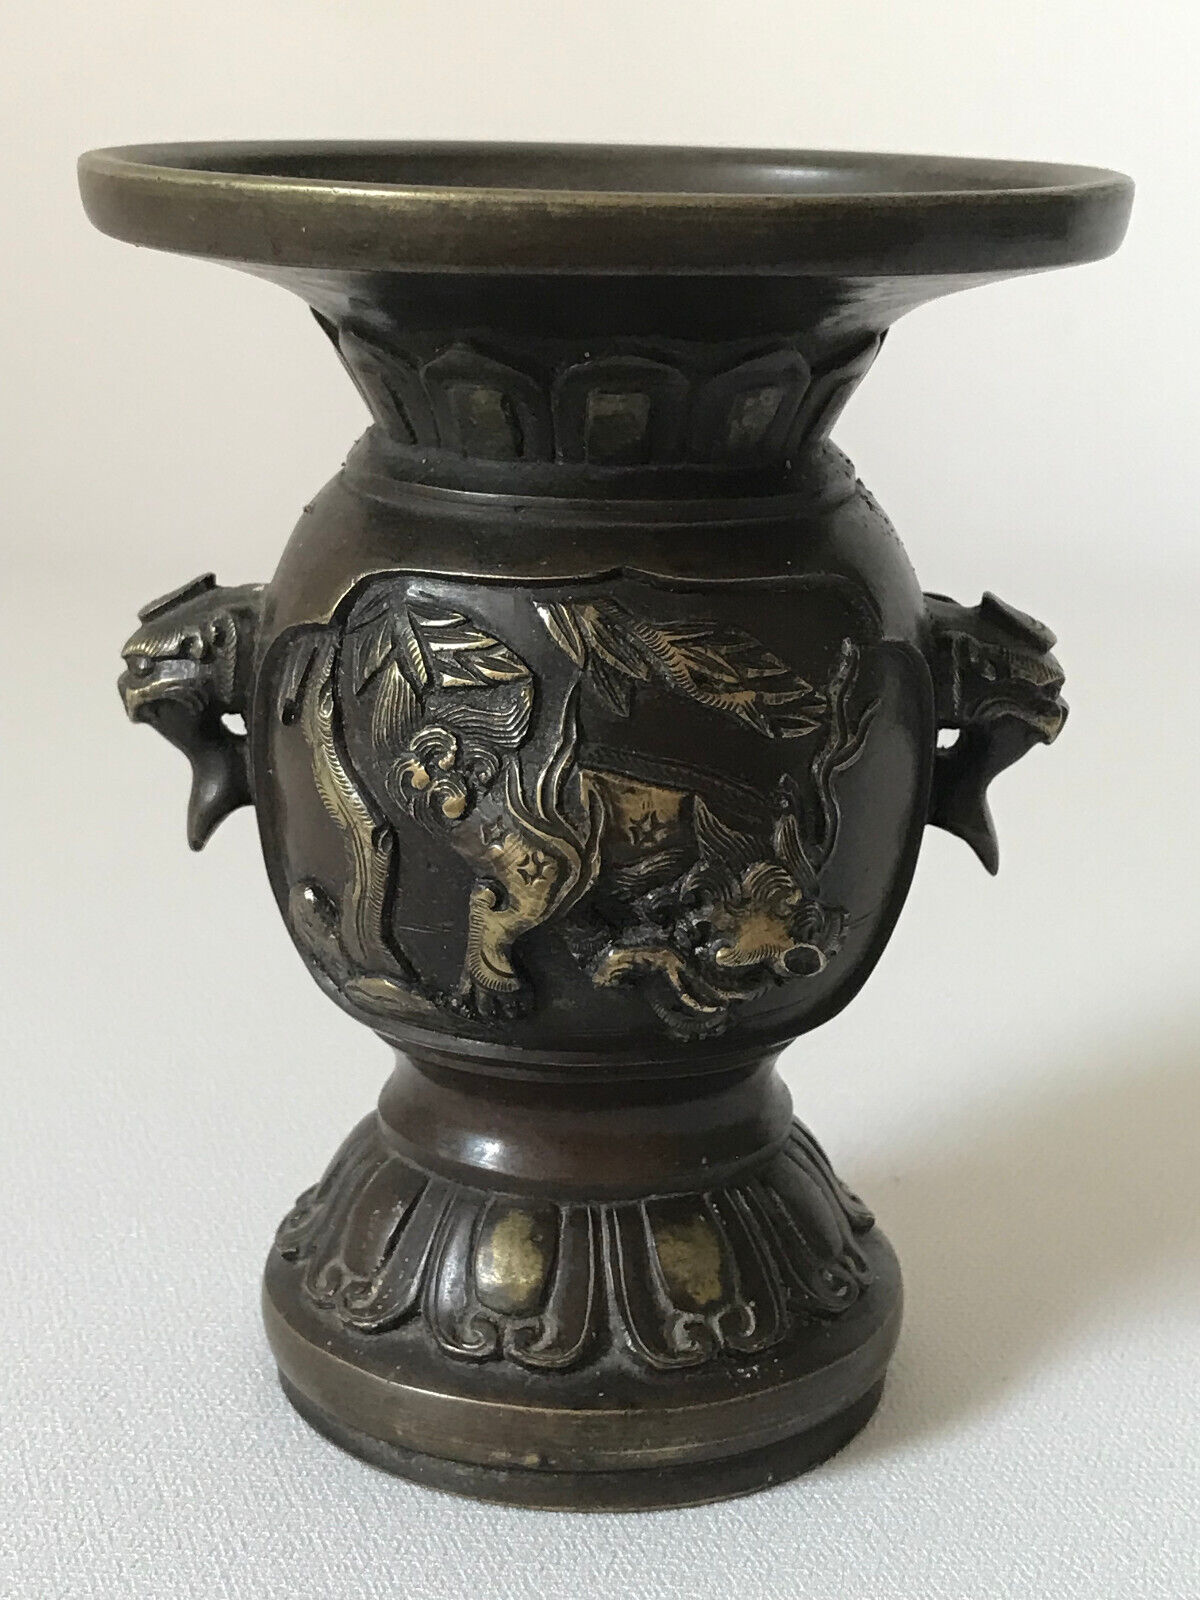 Antique Valuations: Temple Vase Very Well Carved Floral Motifs And Mythical Buddhist Animals 19thc